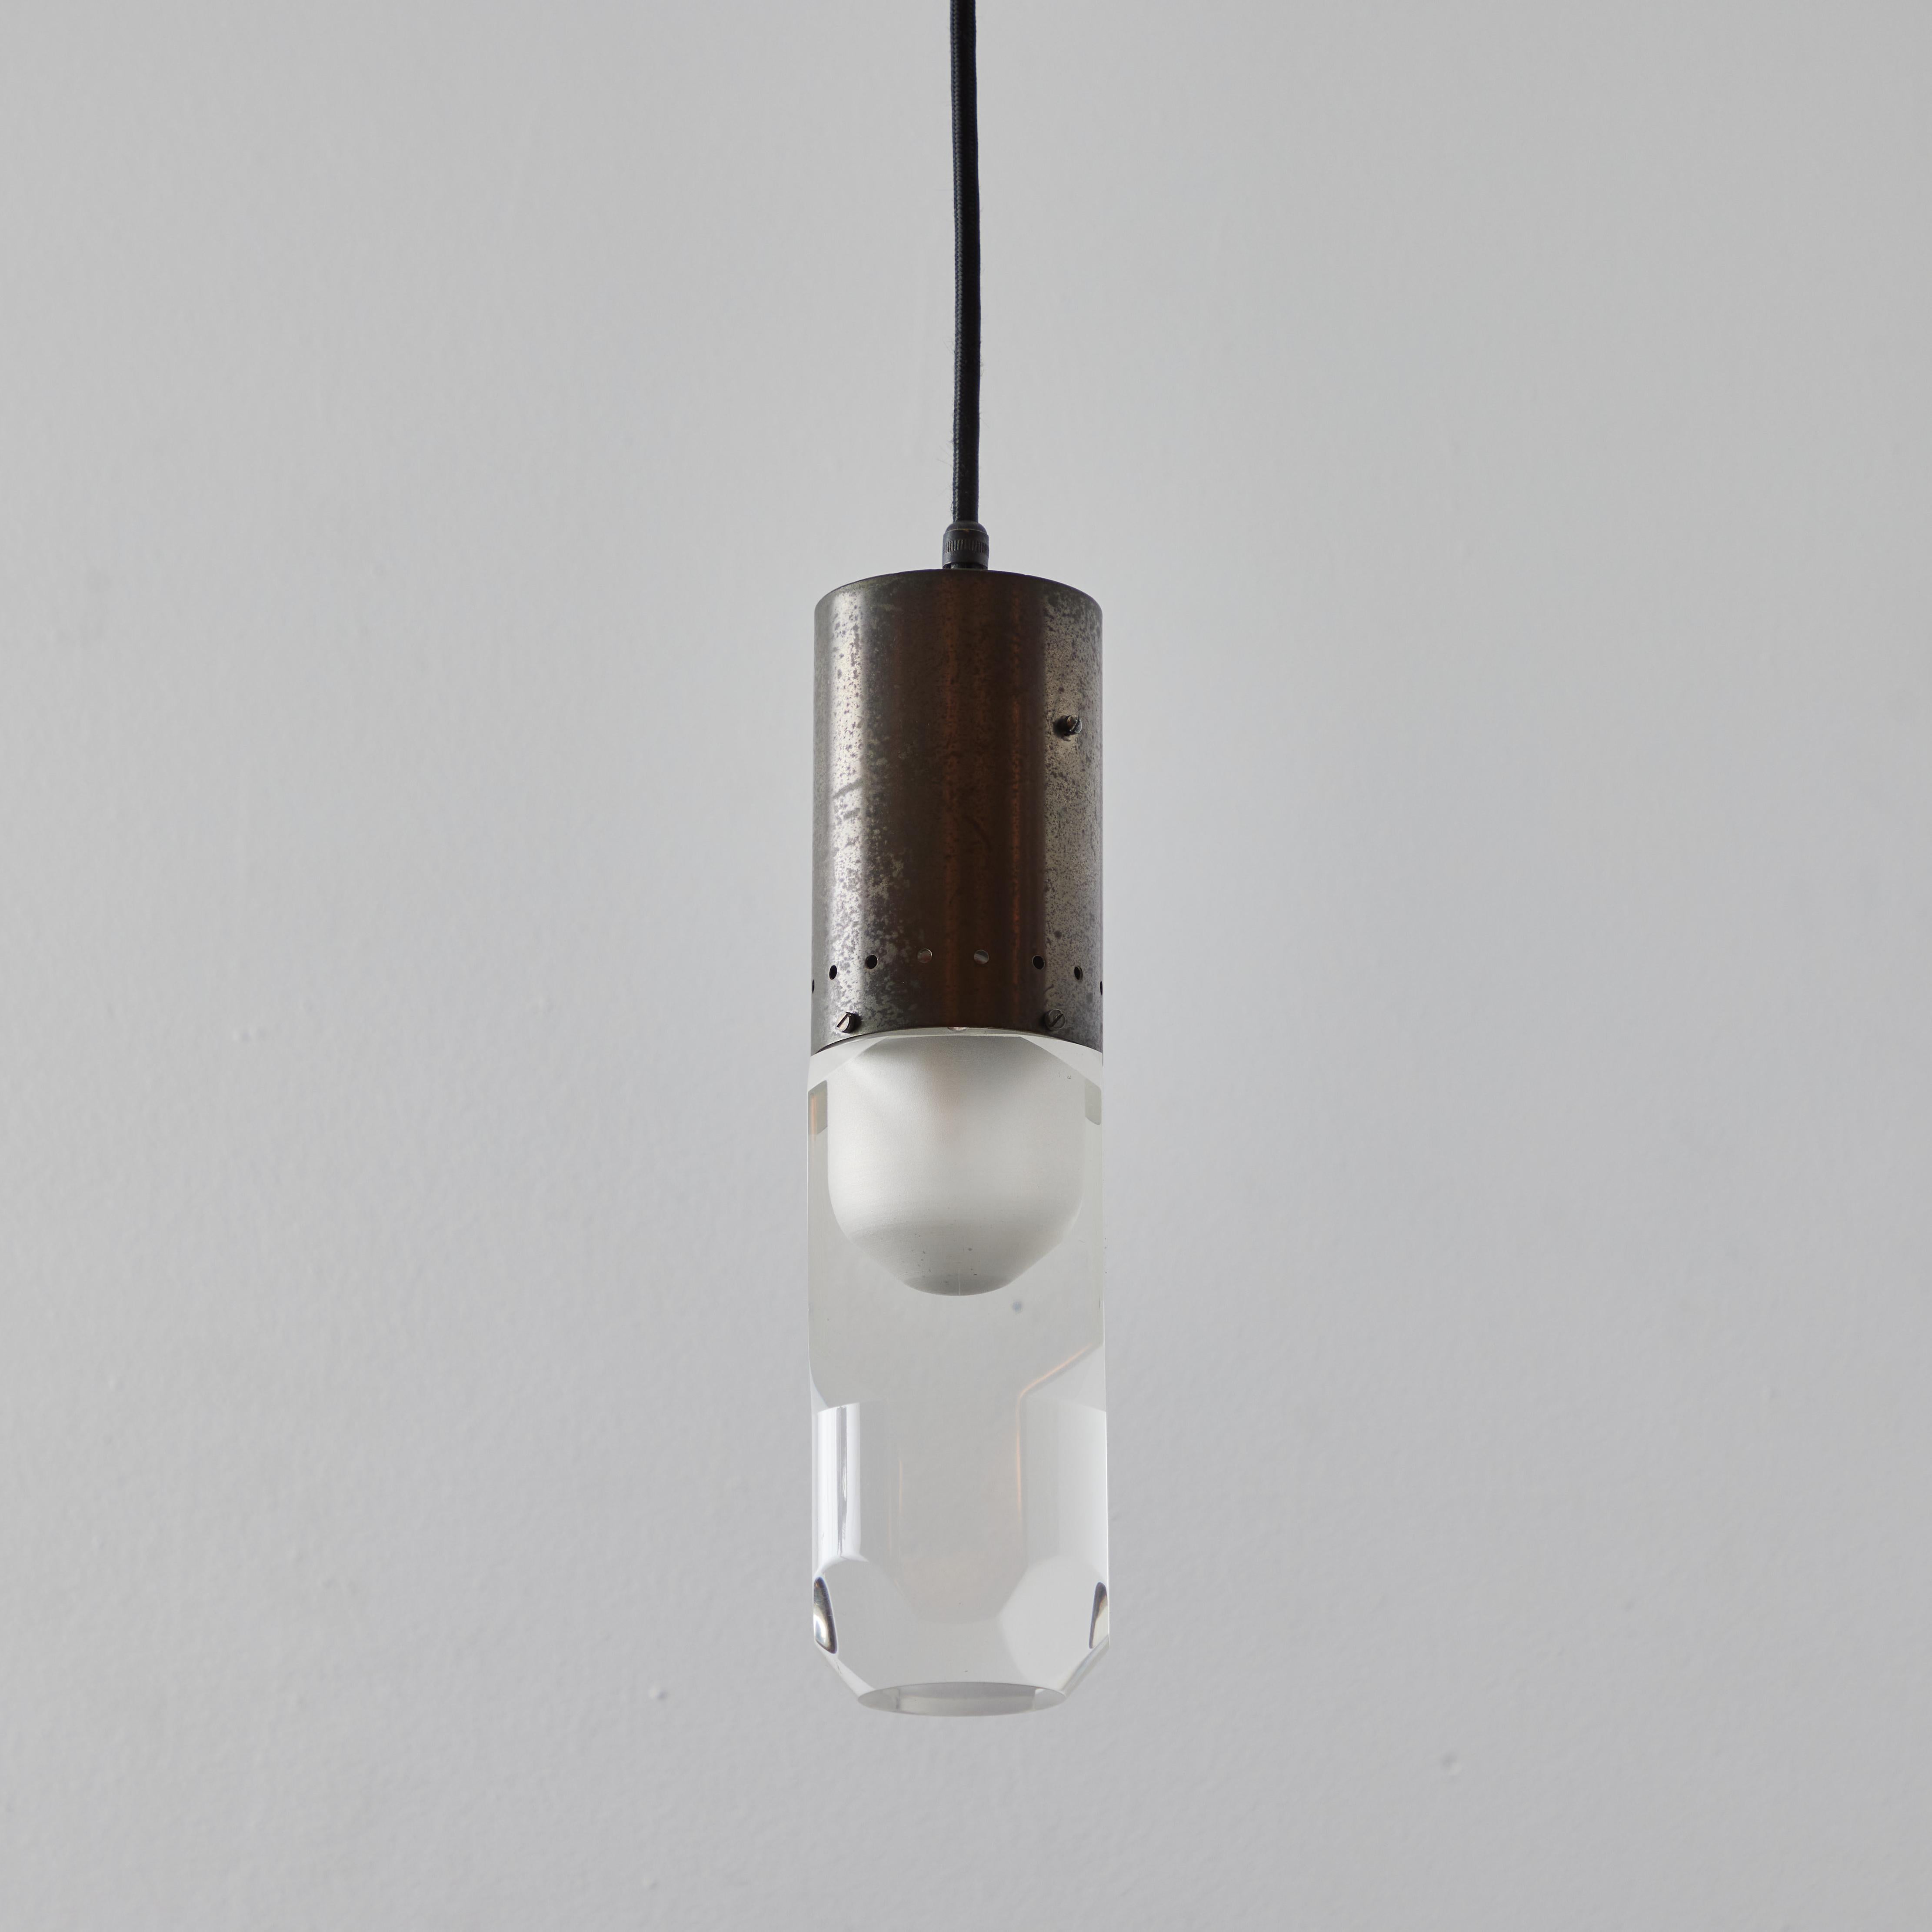 Italian 1960s Faceted Diffuser Pendant Lamp Attributed to Stilnovo For Sale